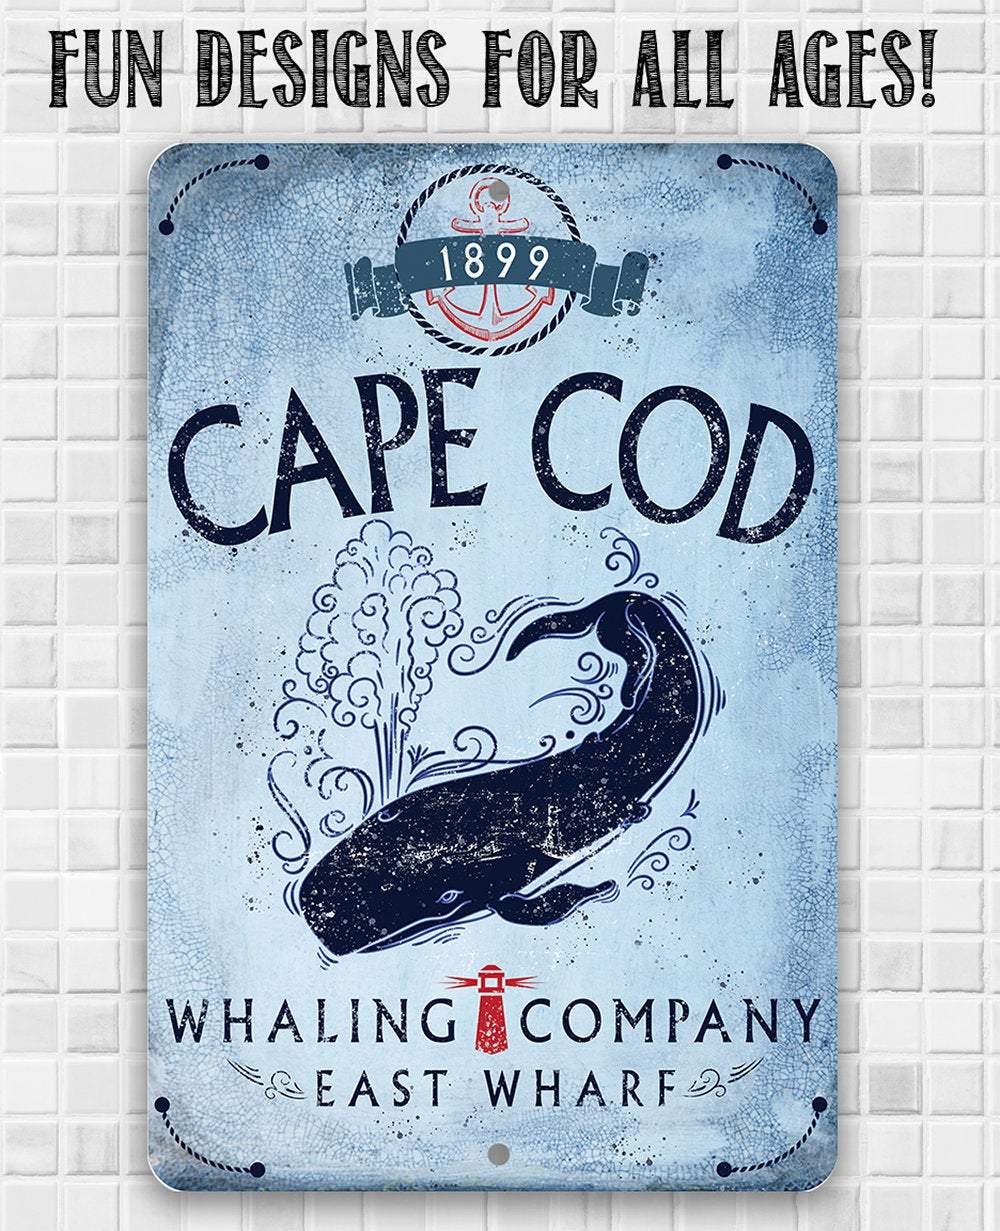 Cape Cod Whaling Company - Metal Sign | Lone Star Art.